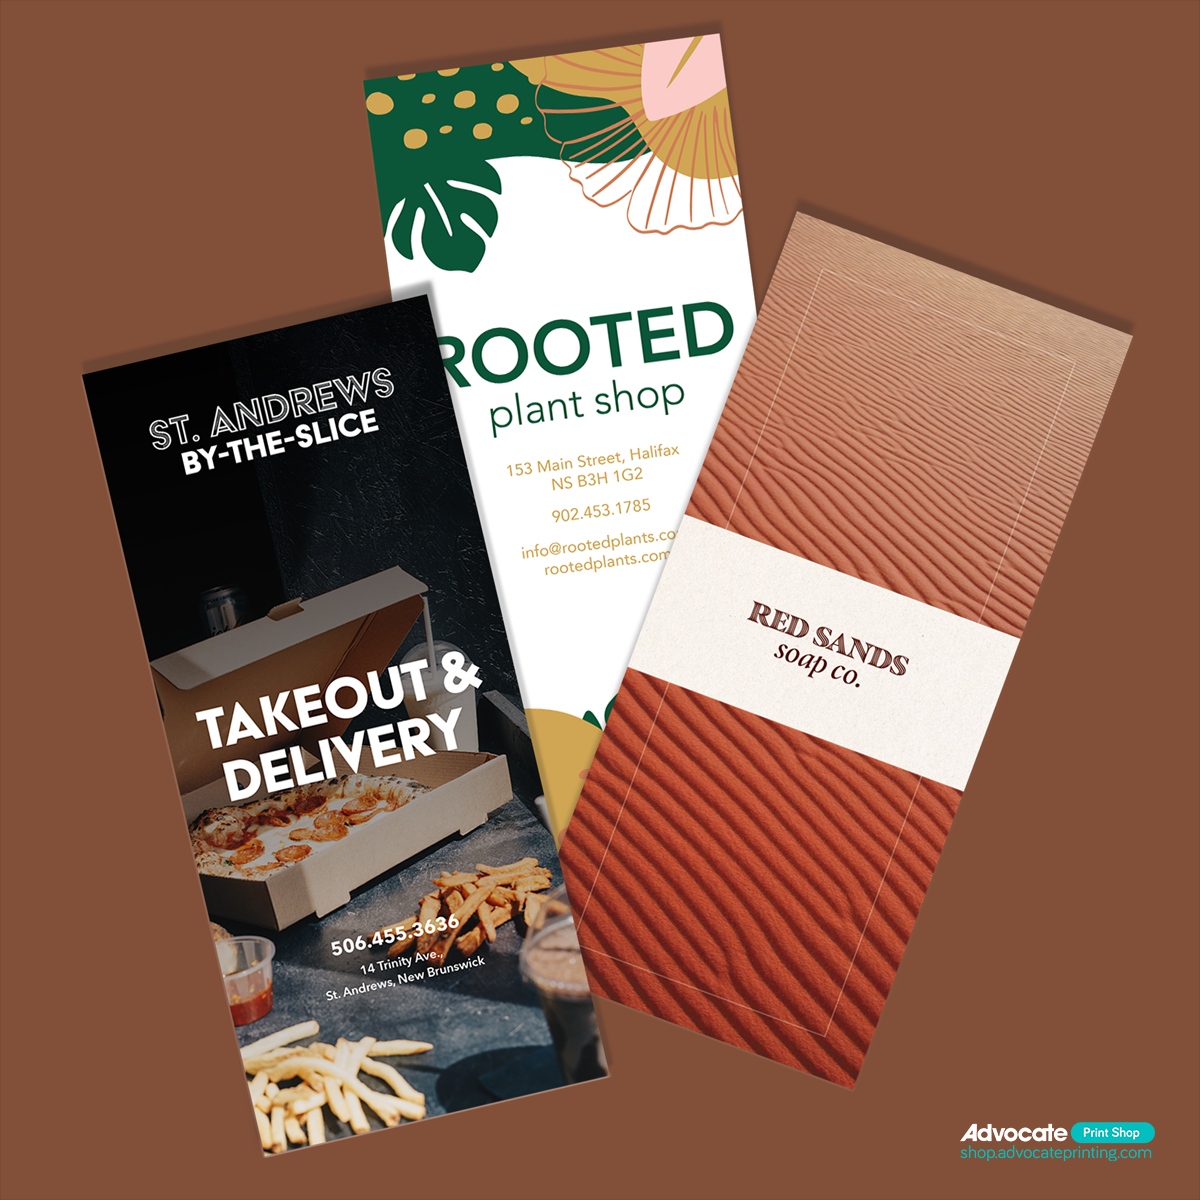 When planning an event or conference, promotion and first impressions are essential for everything to go smoothly. Let Advocate design a memorable experience for your clients get a quote today at shop.advocateprinting.com #marketing #business